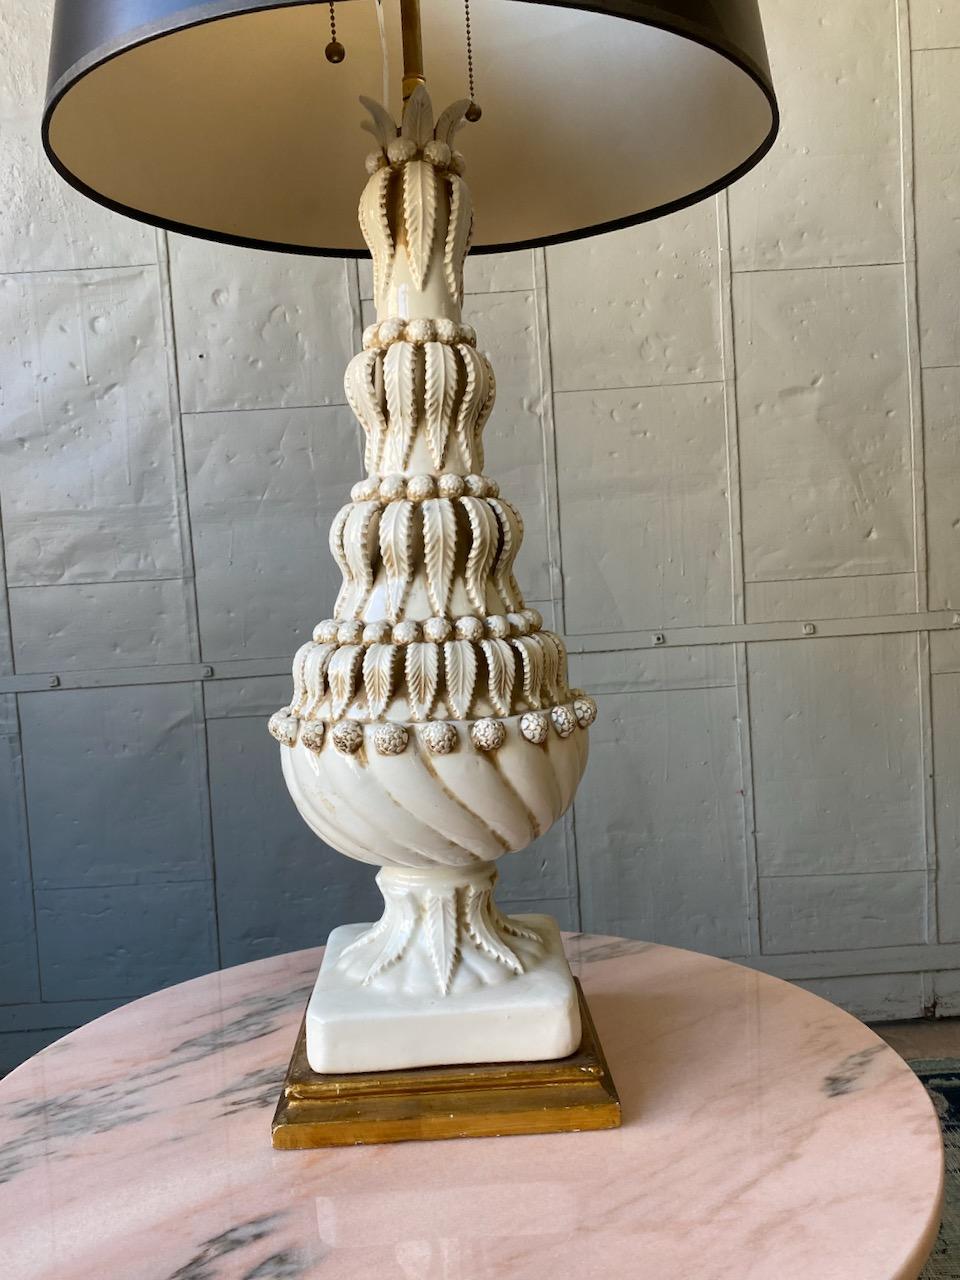 Mid-Century Modern Ornate Spanish Ceramic Table Lamp With Leaf Decorations For Sale